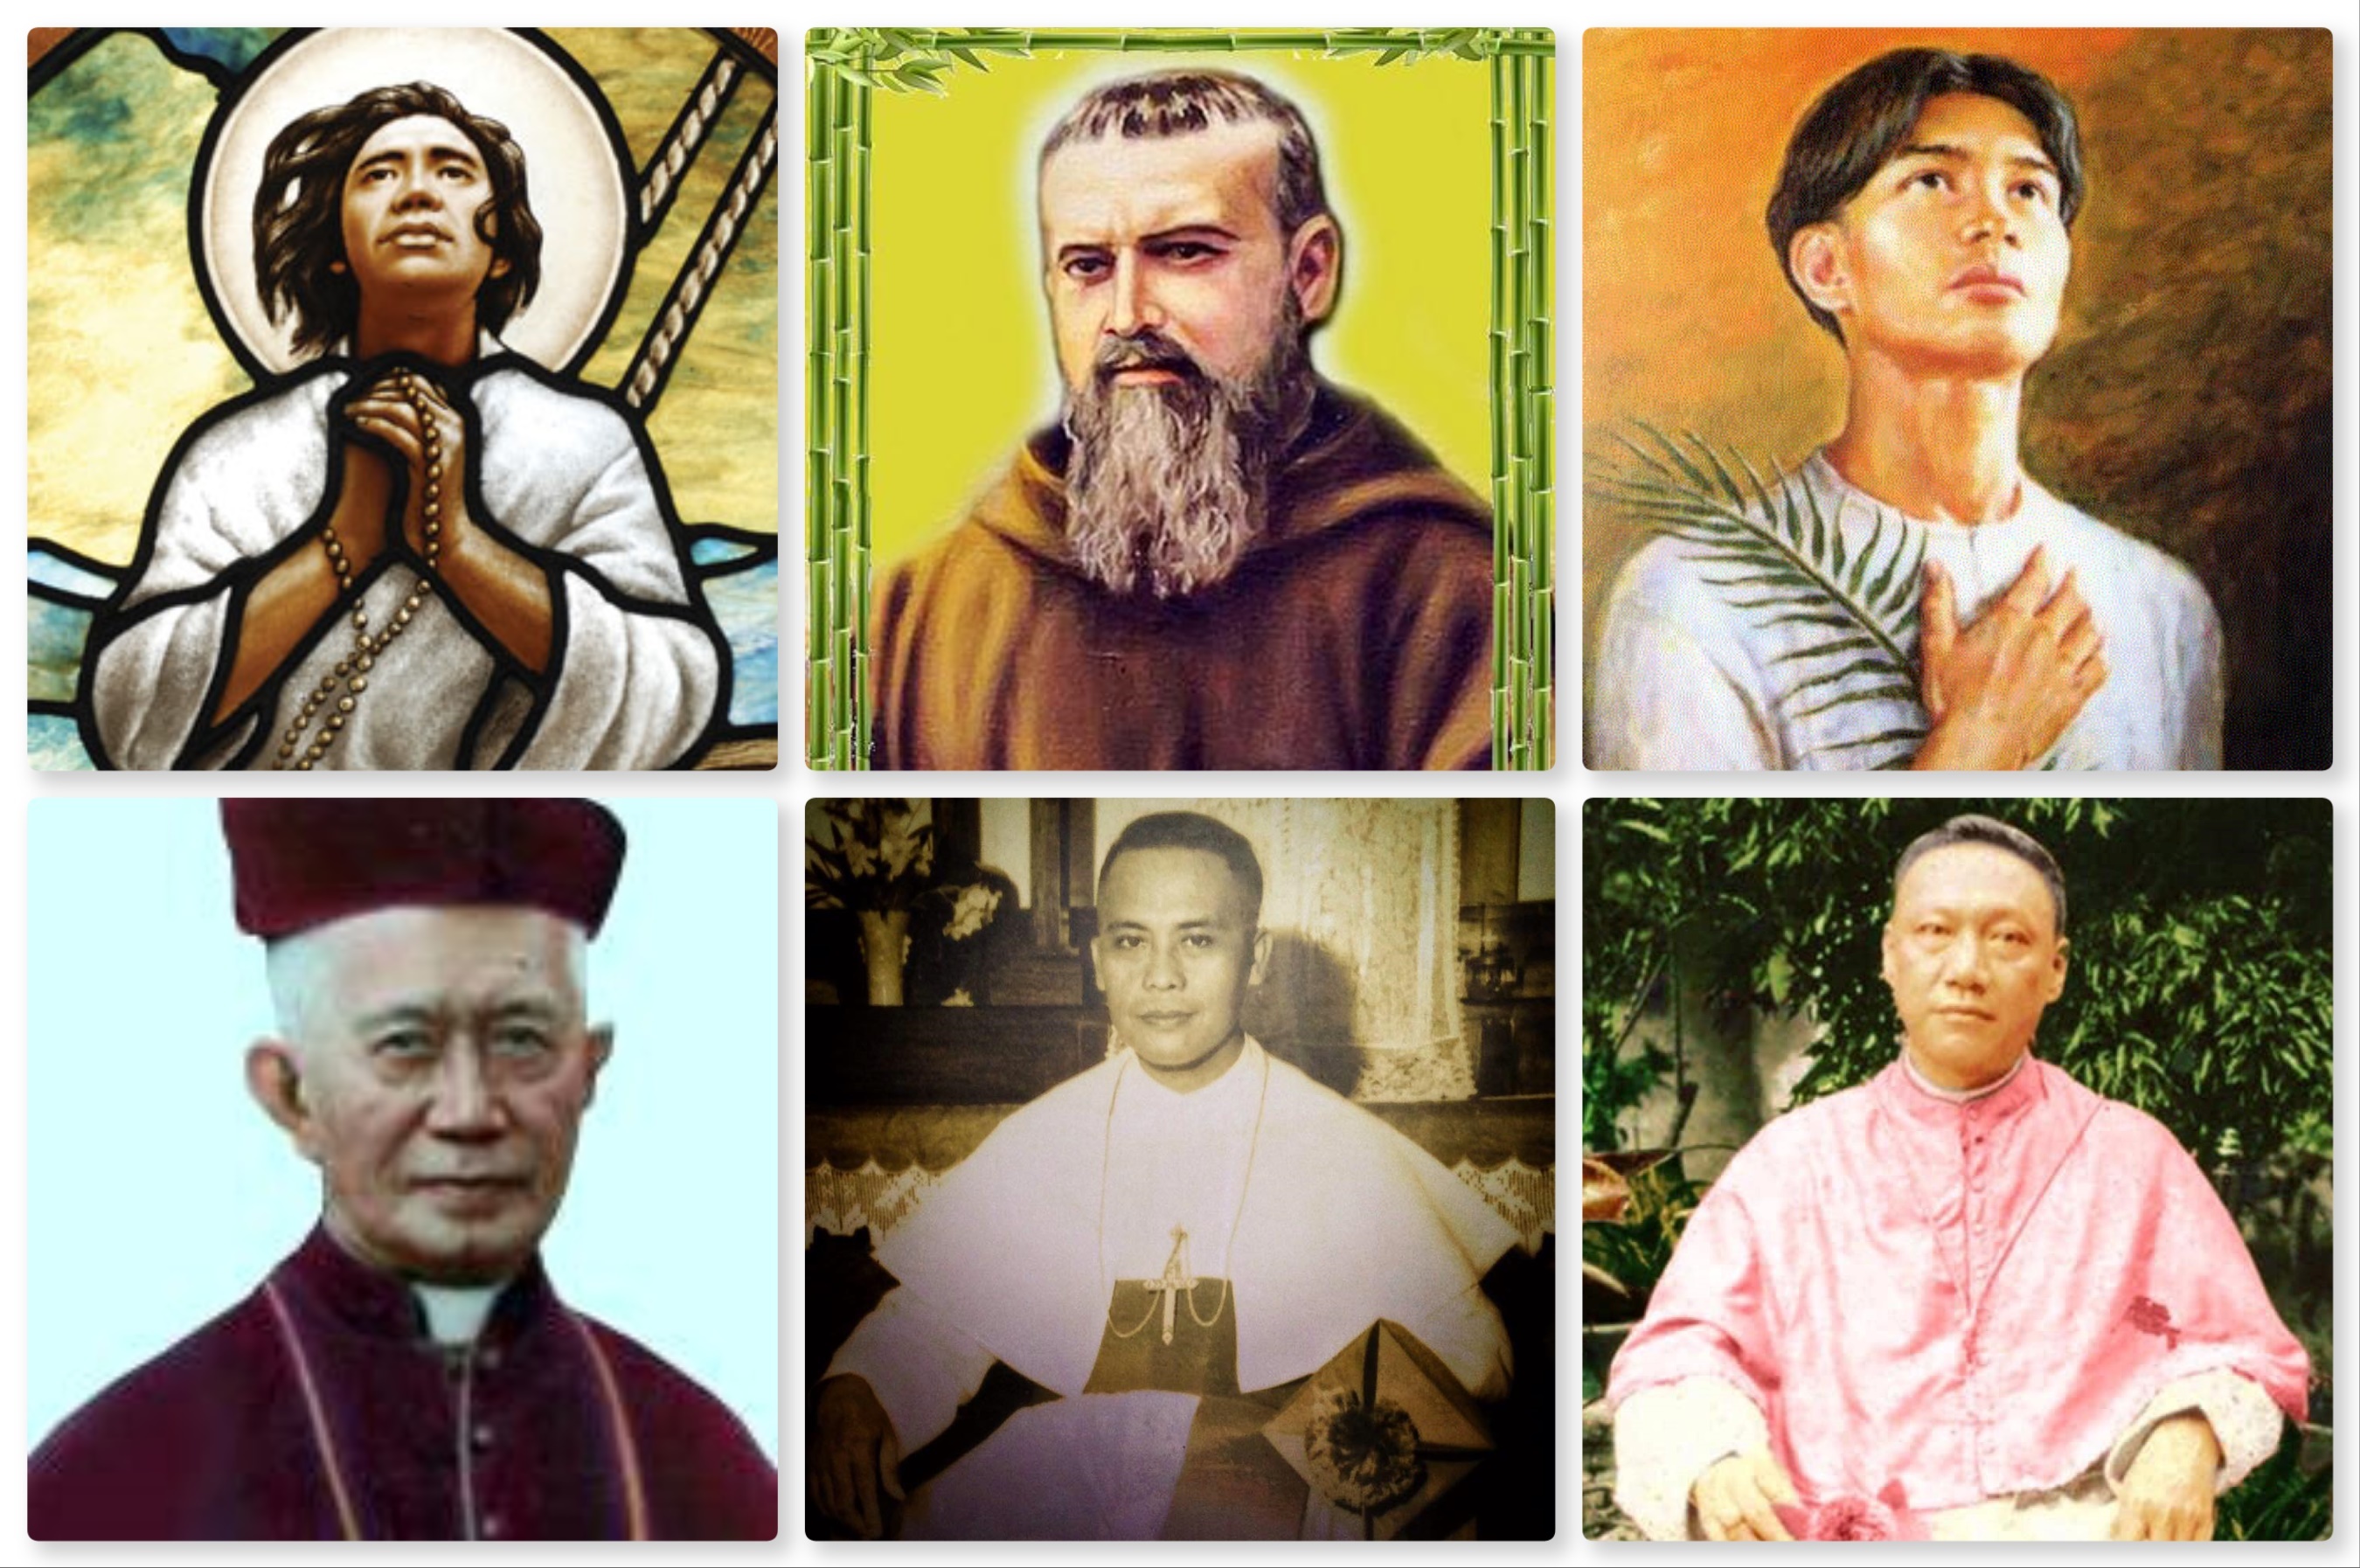 Guide to Filipino Saints, Blesseds, Servants of God - Good News Pilipinas